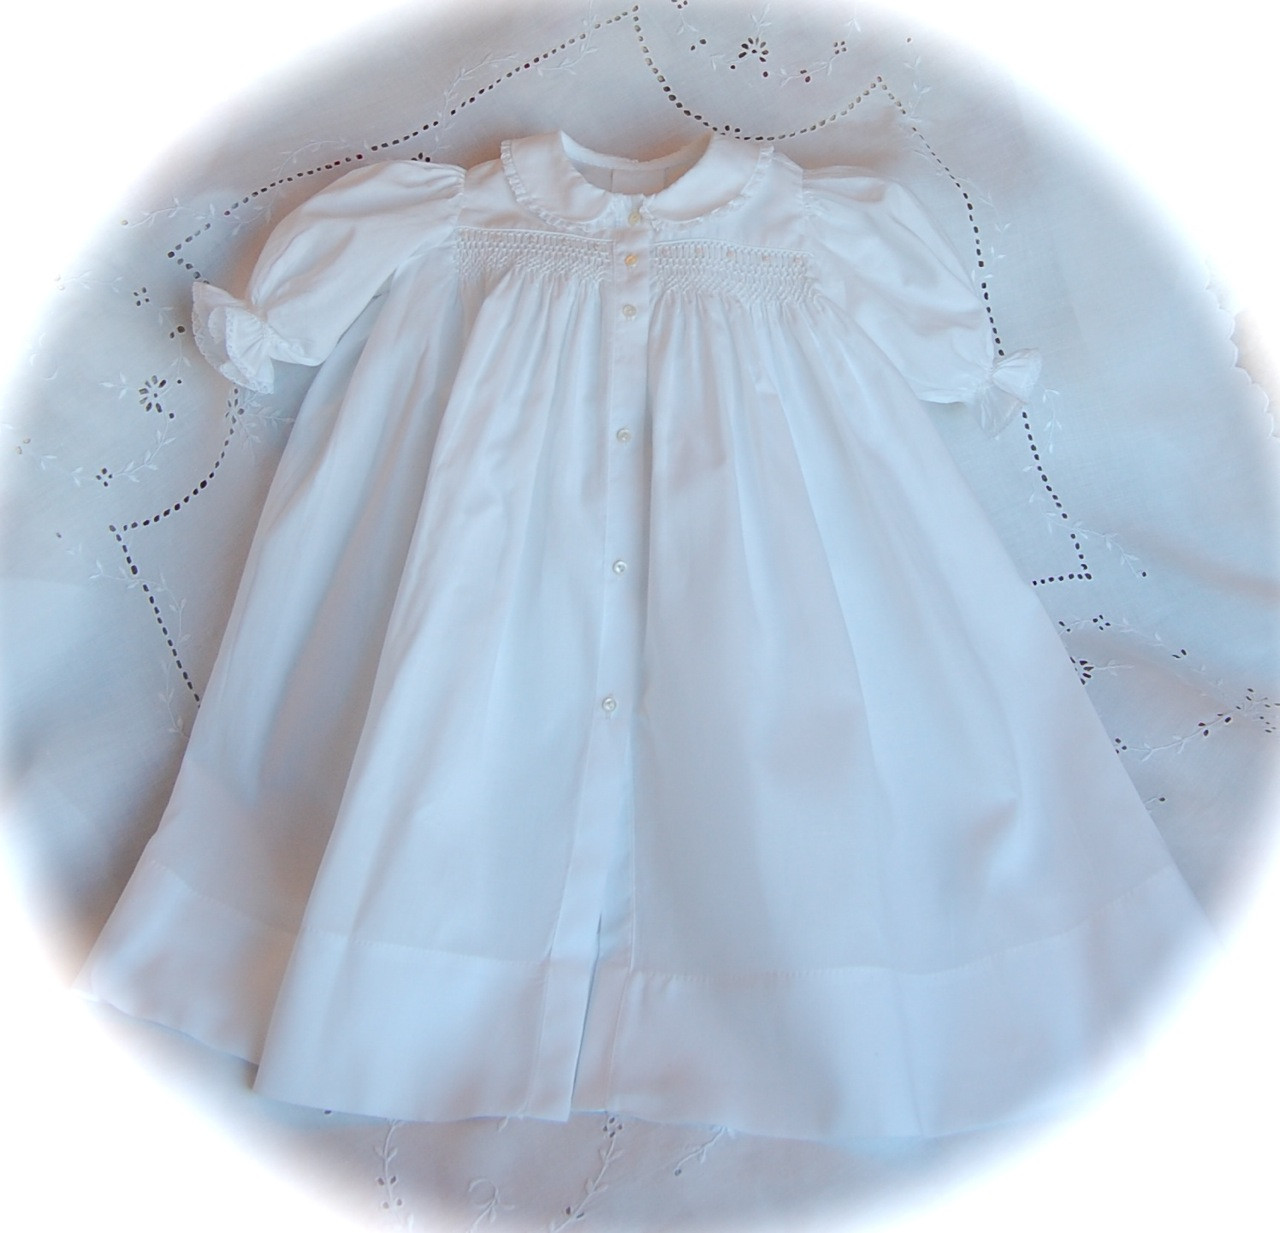 Old Fashion Baby Clothes
 The Old Fashioned Baby Sewing Room Smocked Baby Clothes